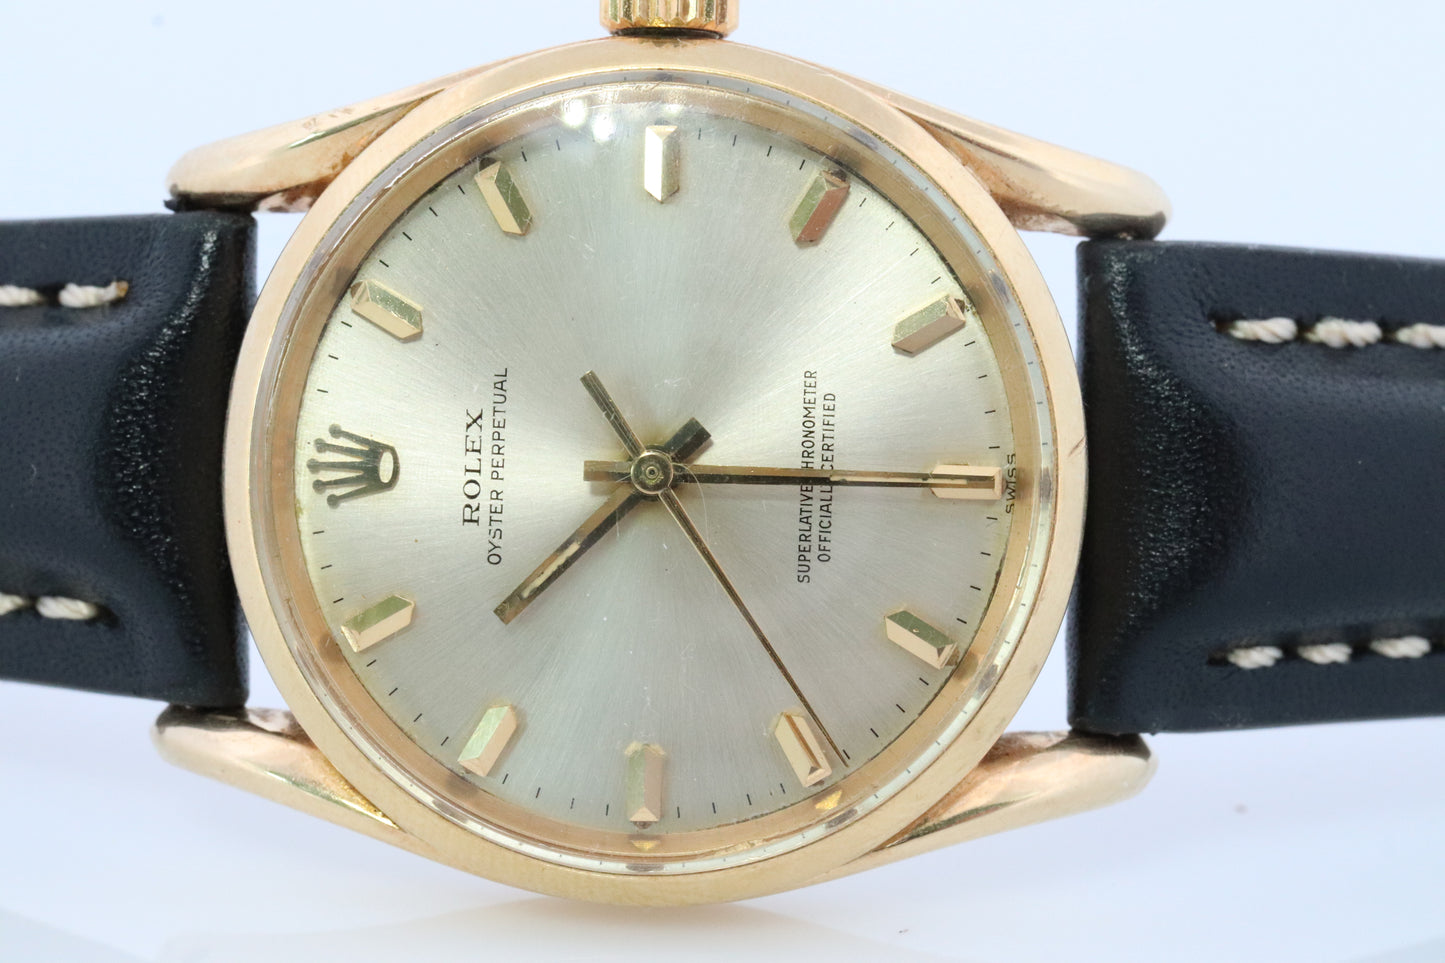 ROLEX Oyster Perpetual Ref 1011 / 1010 "Bombe / Bombay". 14K Yellow Gold Case and Bracelet. Circa 1960.